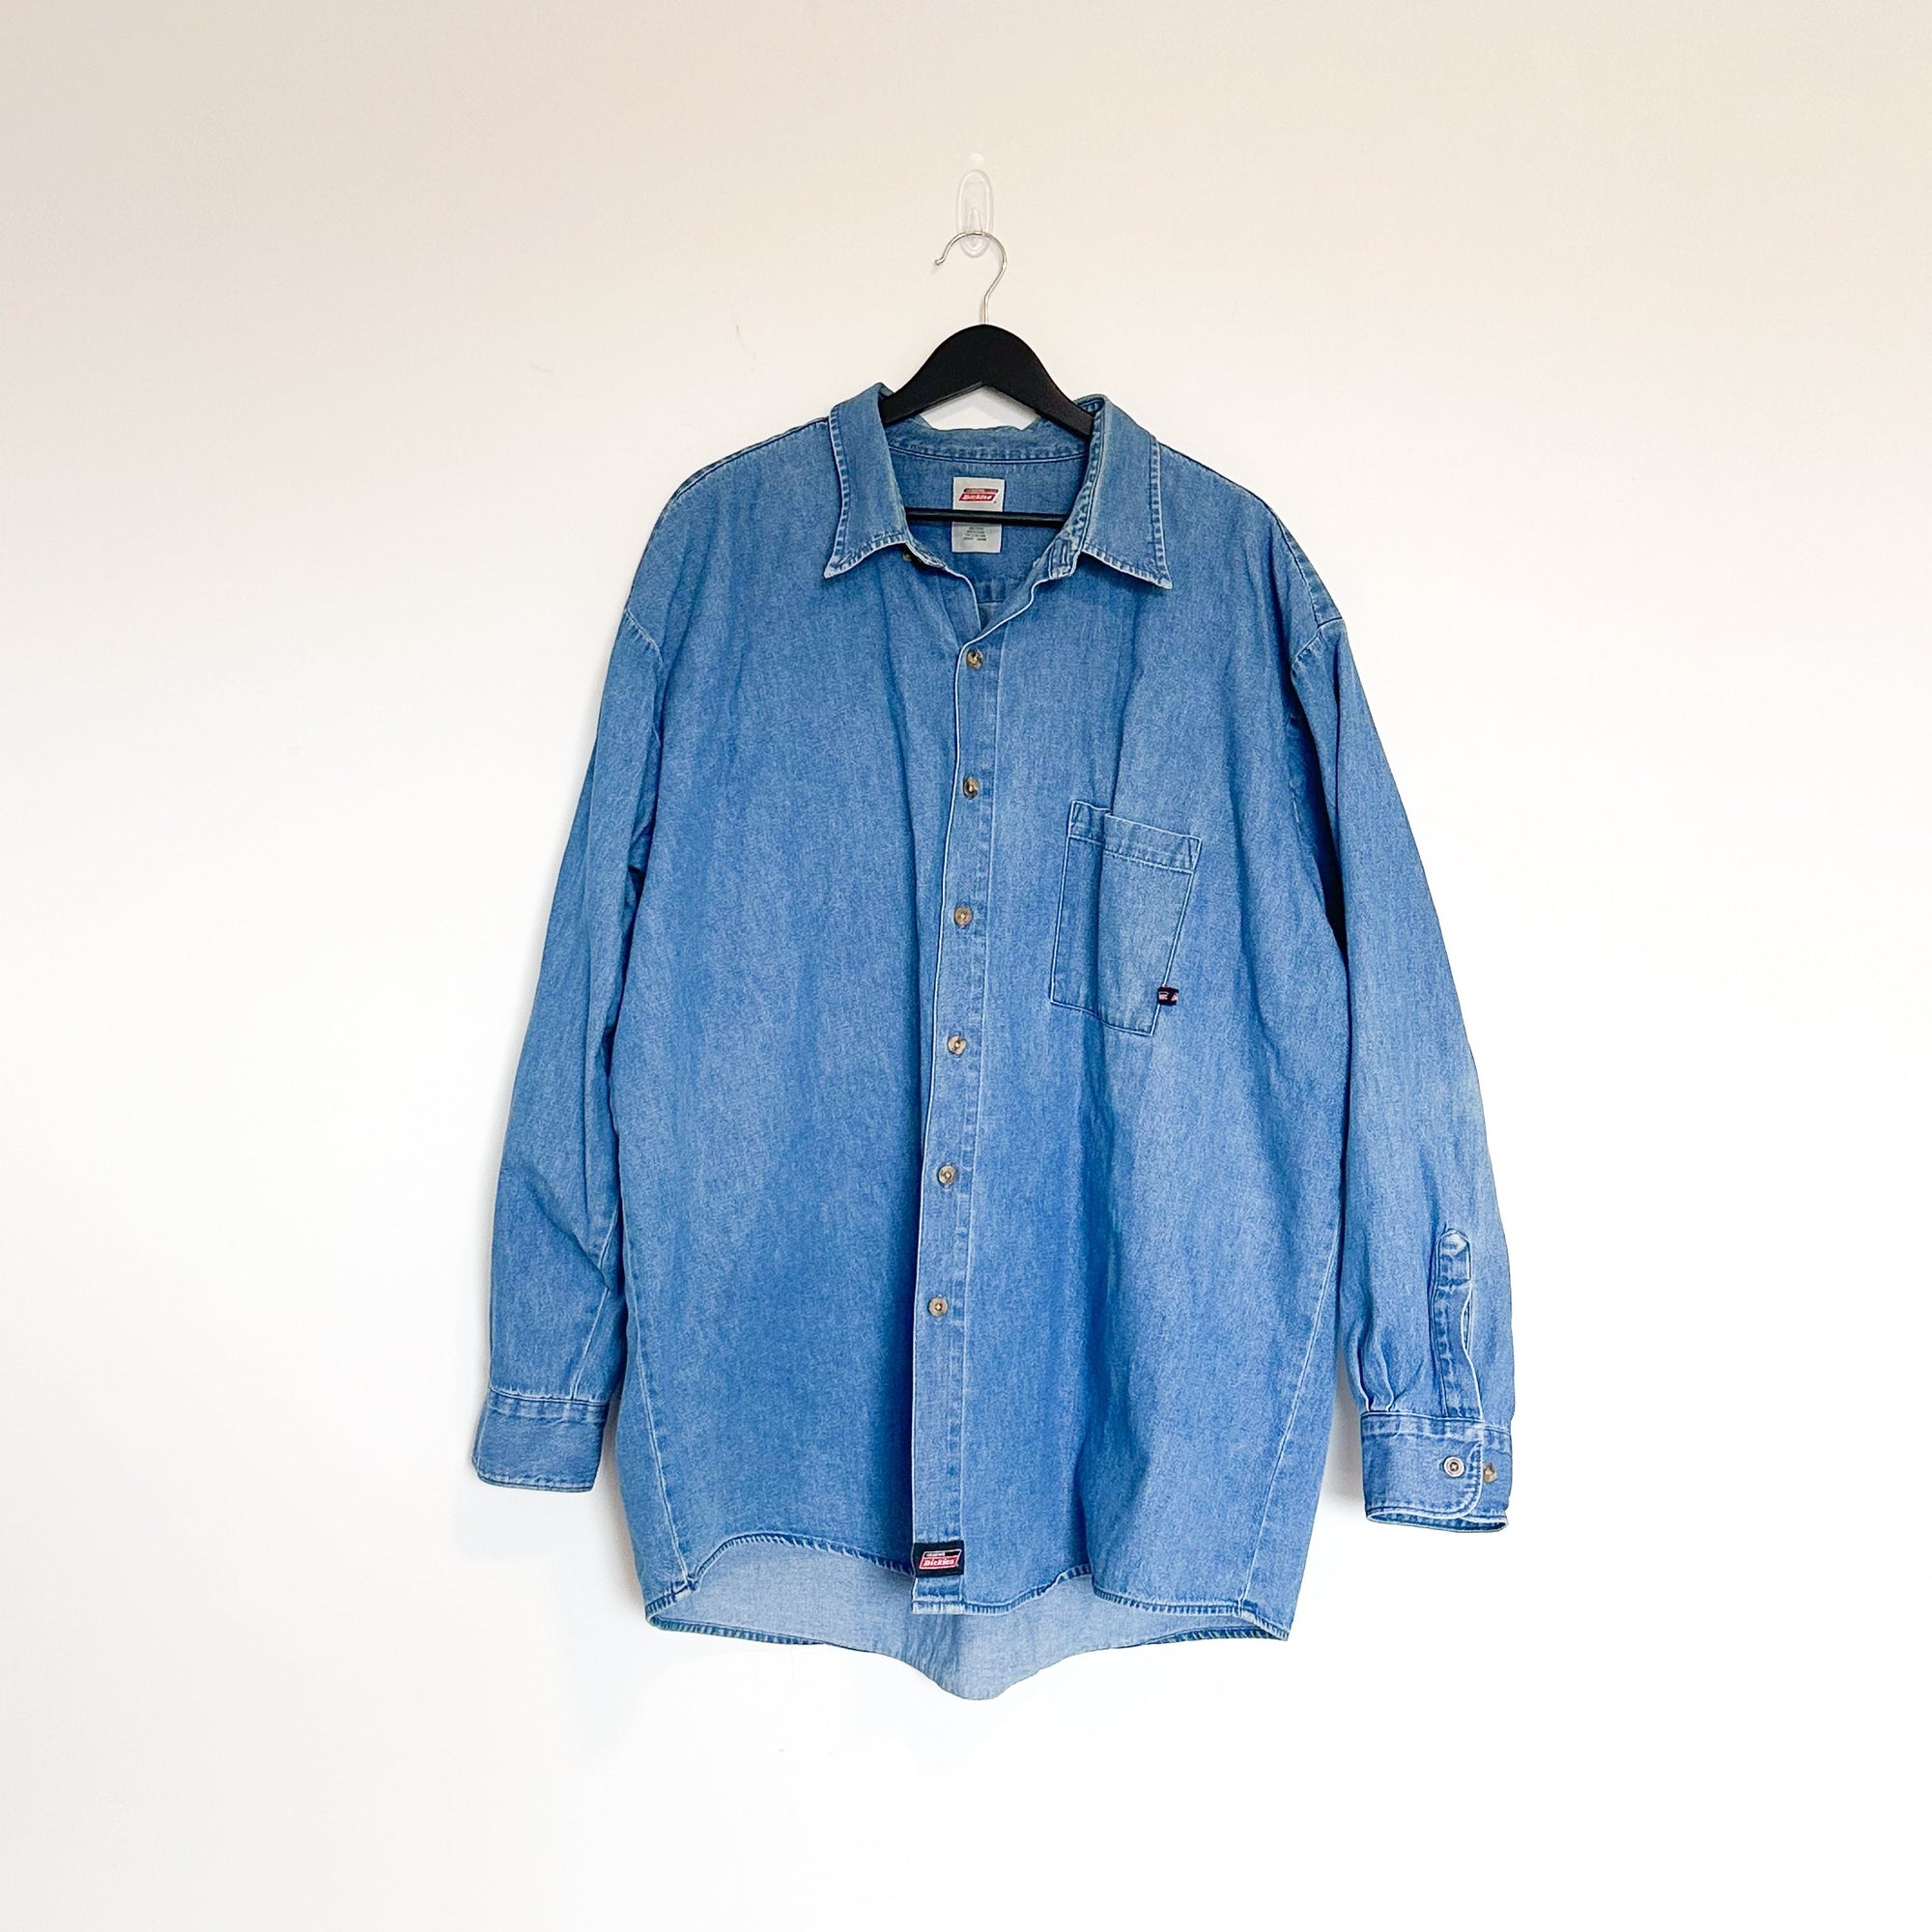 PL Dickies Jean Button-Up